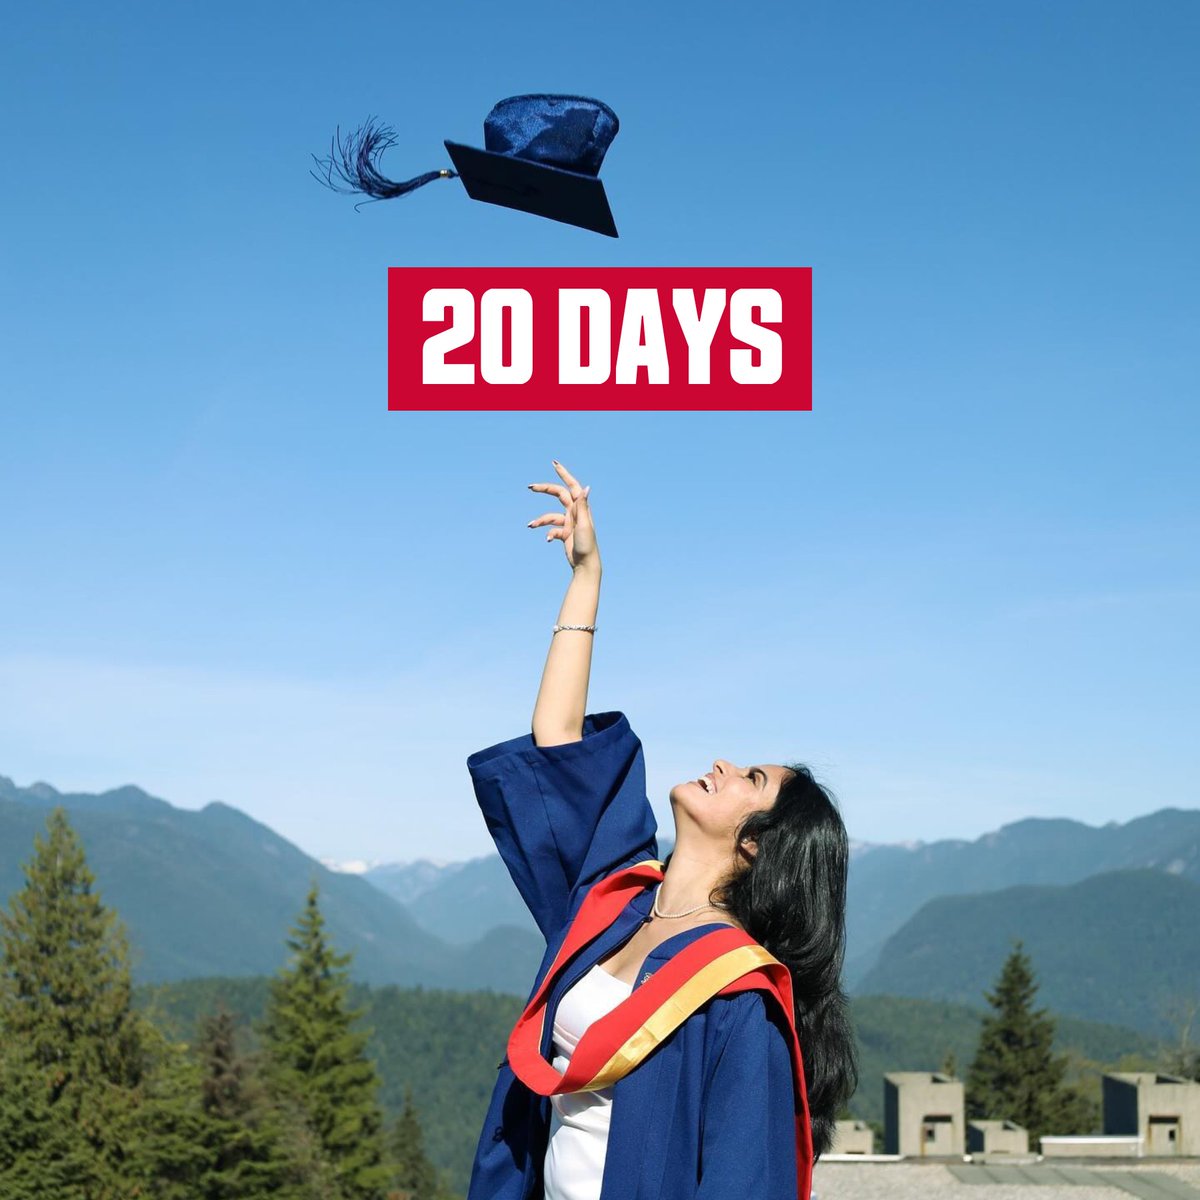 The countdown is on! There are 20 days until 2024 June Convocation! #MySFUGrad 🎓

Graduating? Visit sfu.ca/convocation to get all the details.

Thanks to @/premjpeg (Instagram) for the photos (featuring alumnus Jasmine G.)!

@SFU @SFUCentral